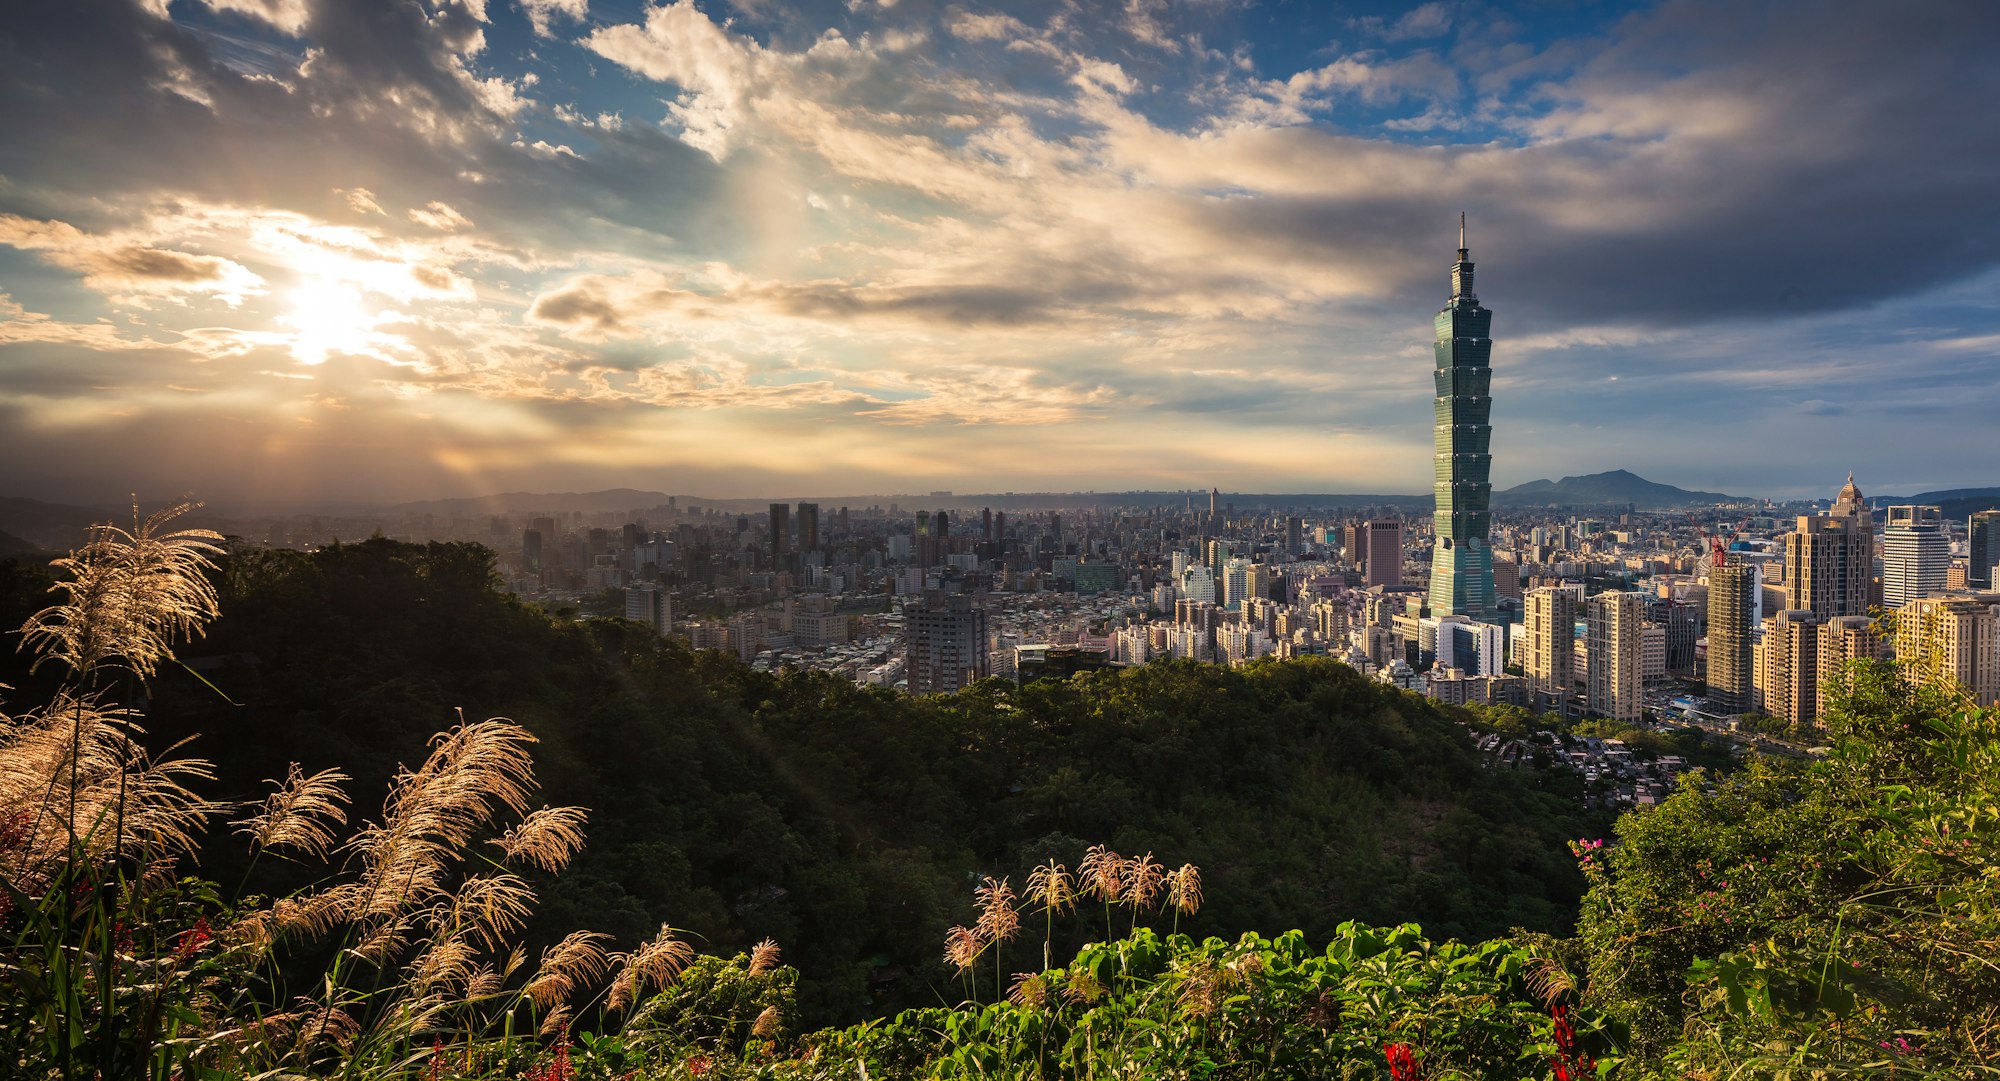 Homecoming: Reflections on Returning to Taiwan